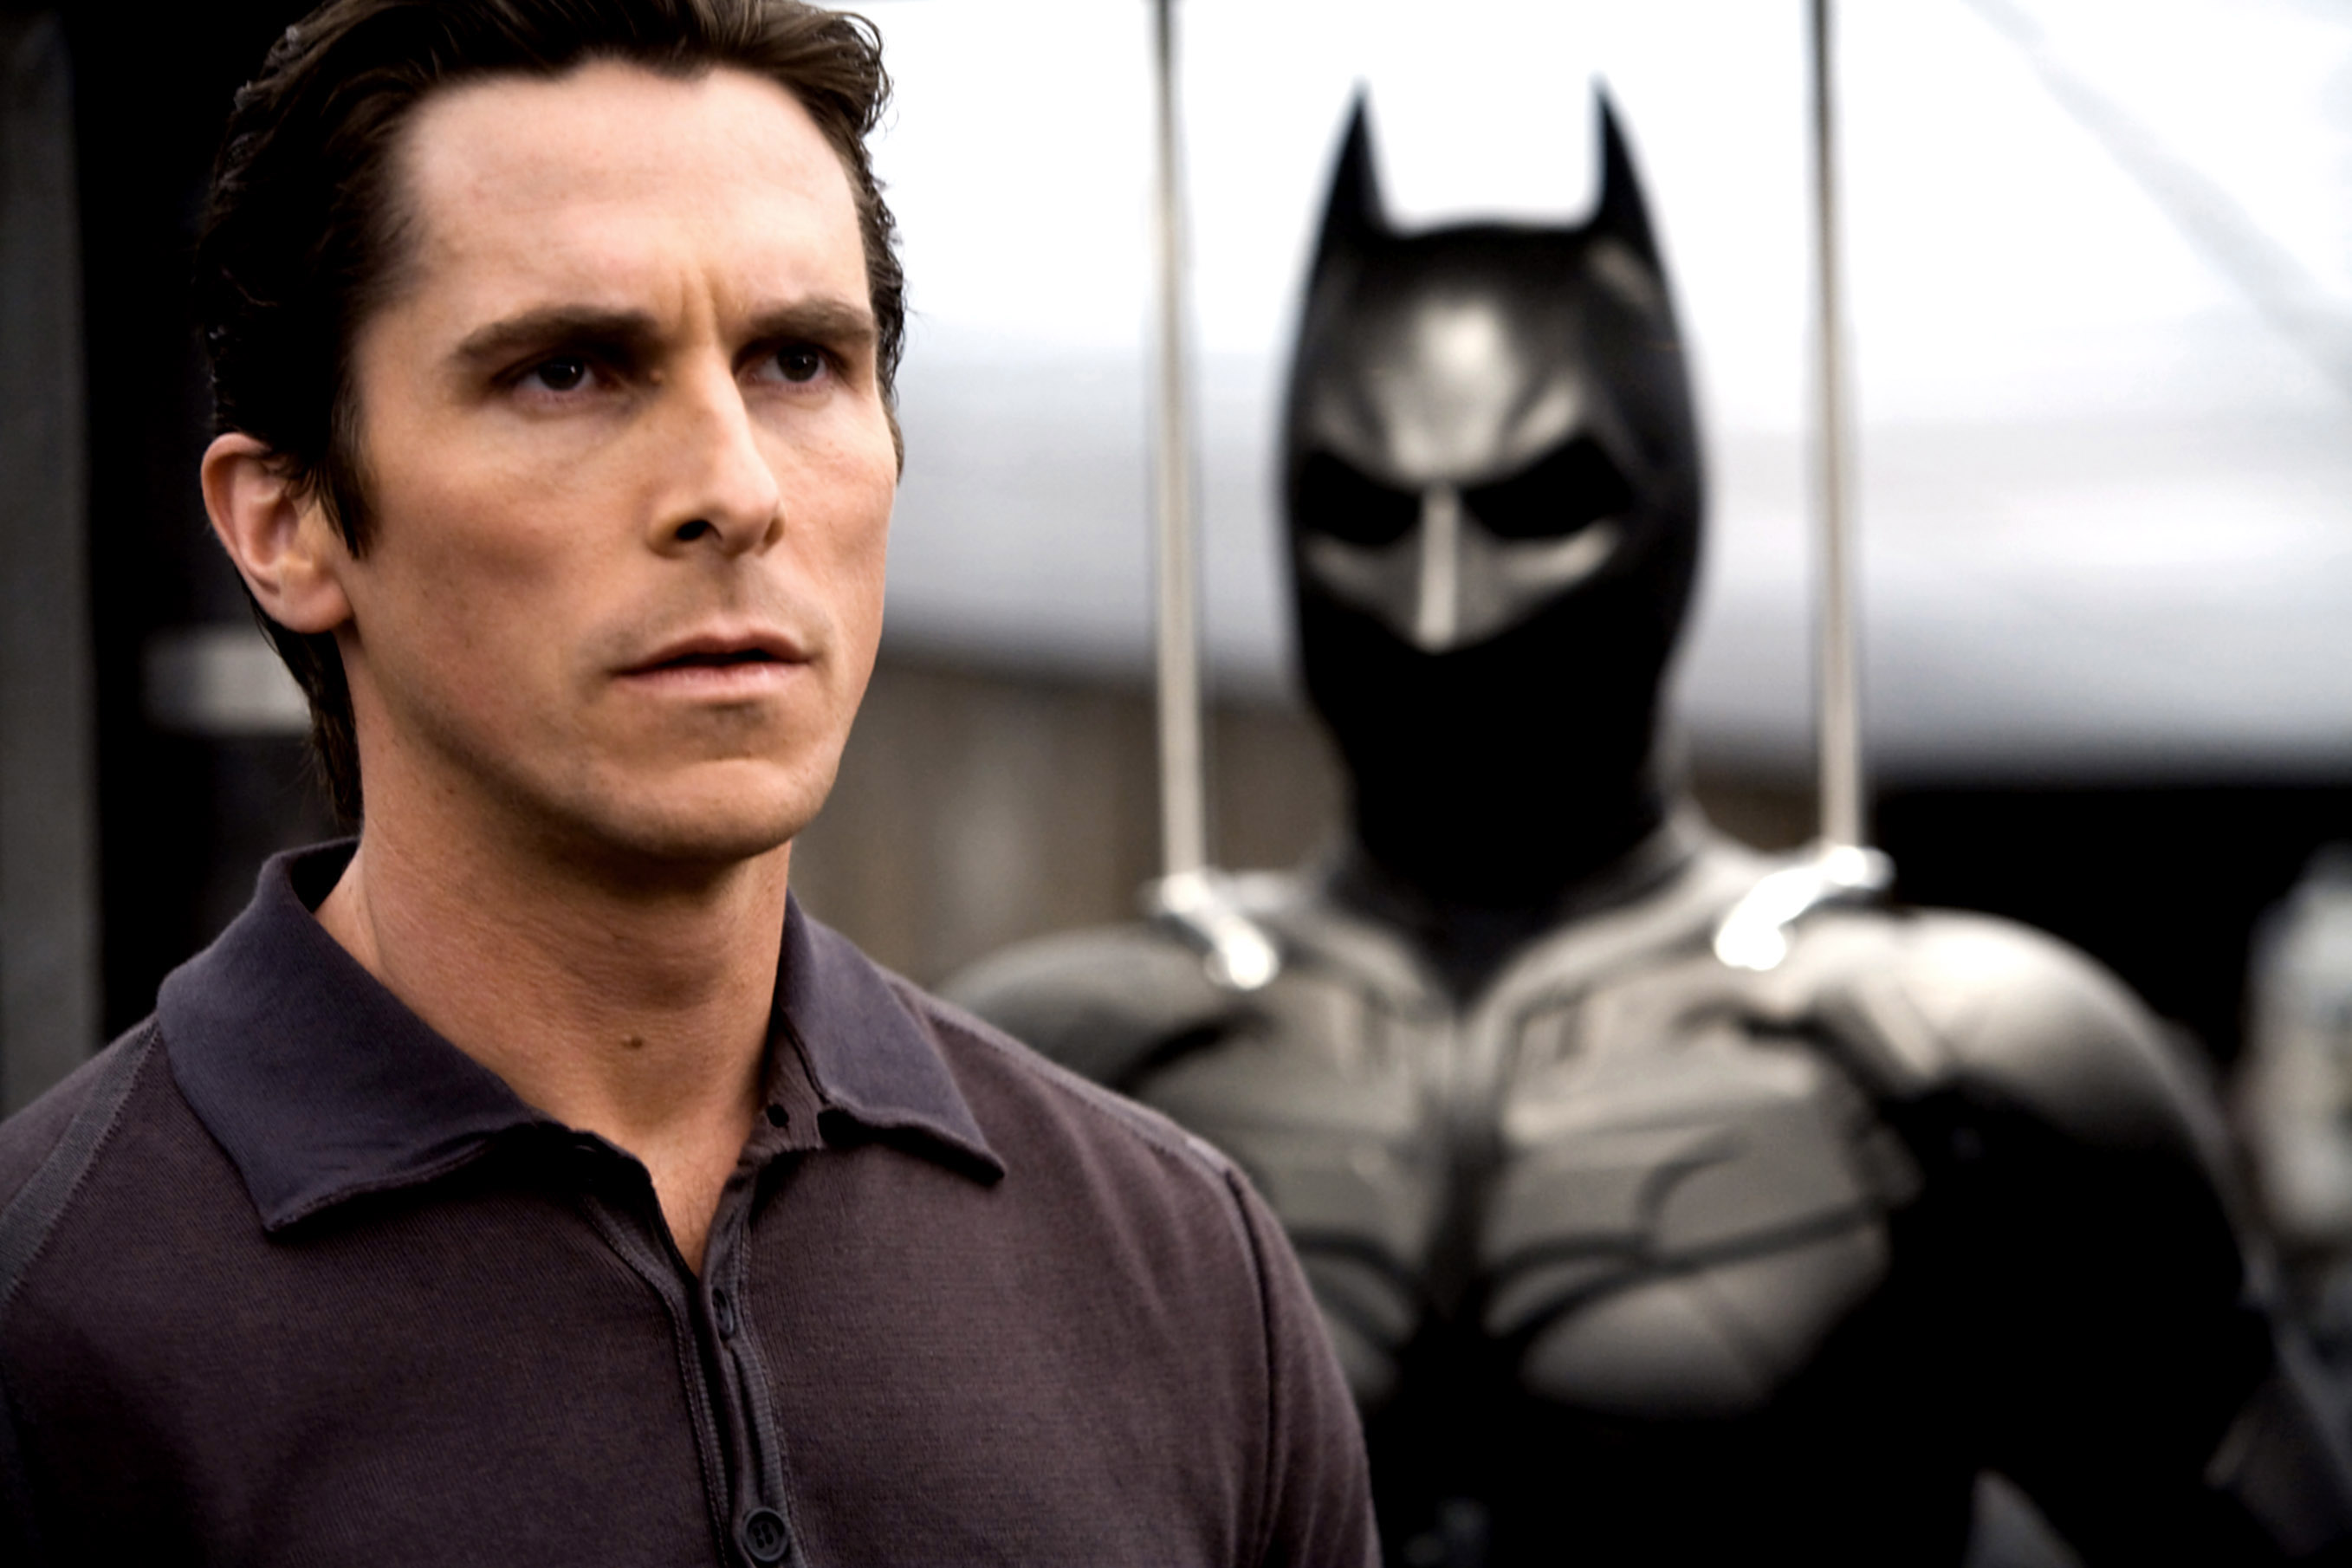 Christian Bale Was Laughed at Over Playing a 'Serious' Batman